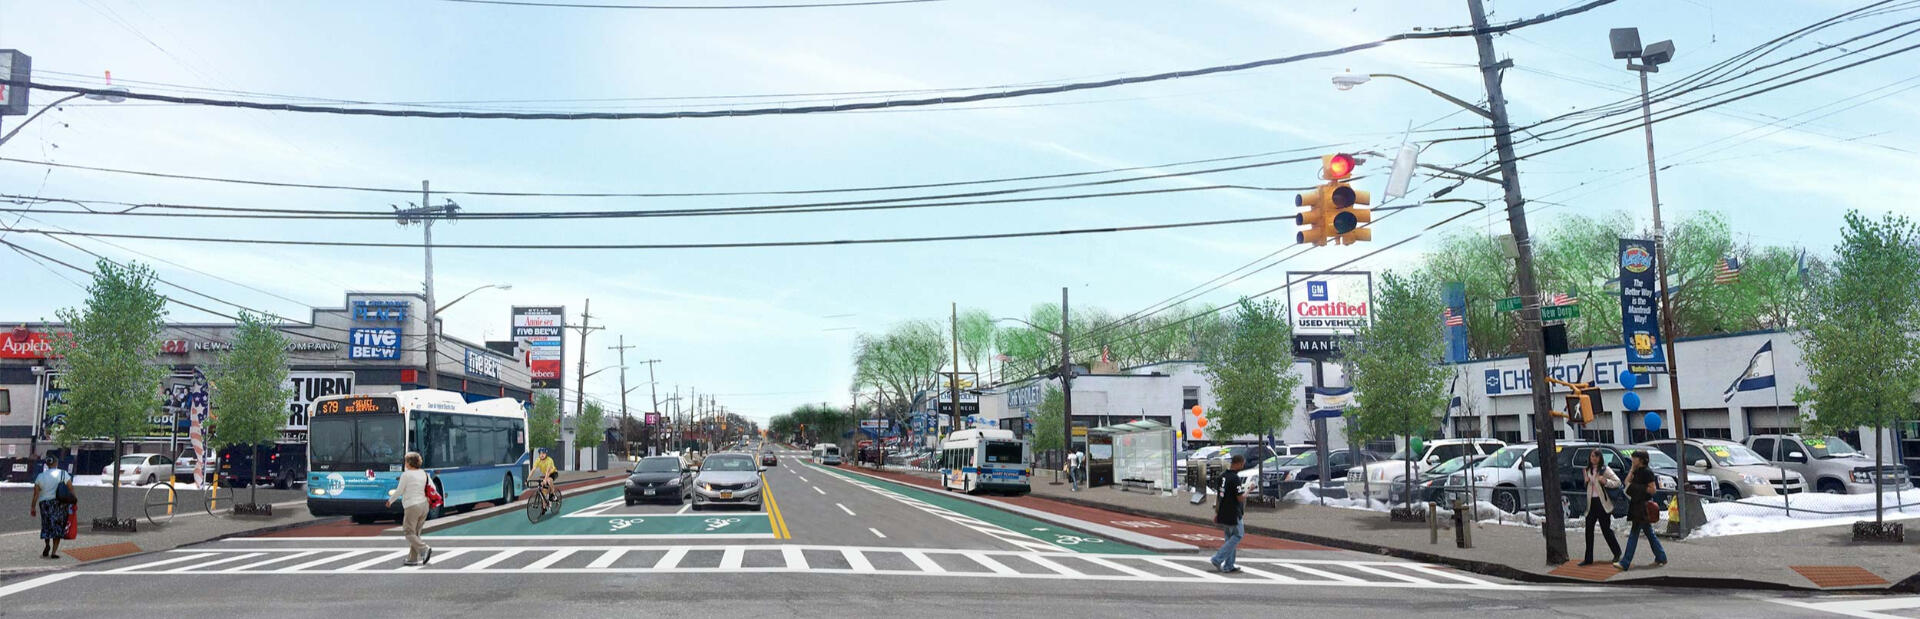 Rendering of a transformed Hylan Boulevard at New Dorp Lane on Staten Island with protected bus lanes in two directions, bike lanes in both directions, four lanes for cars and clear markings for safe pedestrian passage in the cross walk.